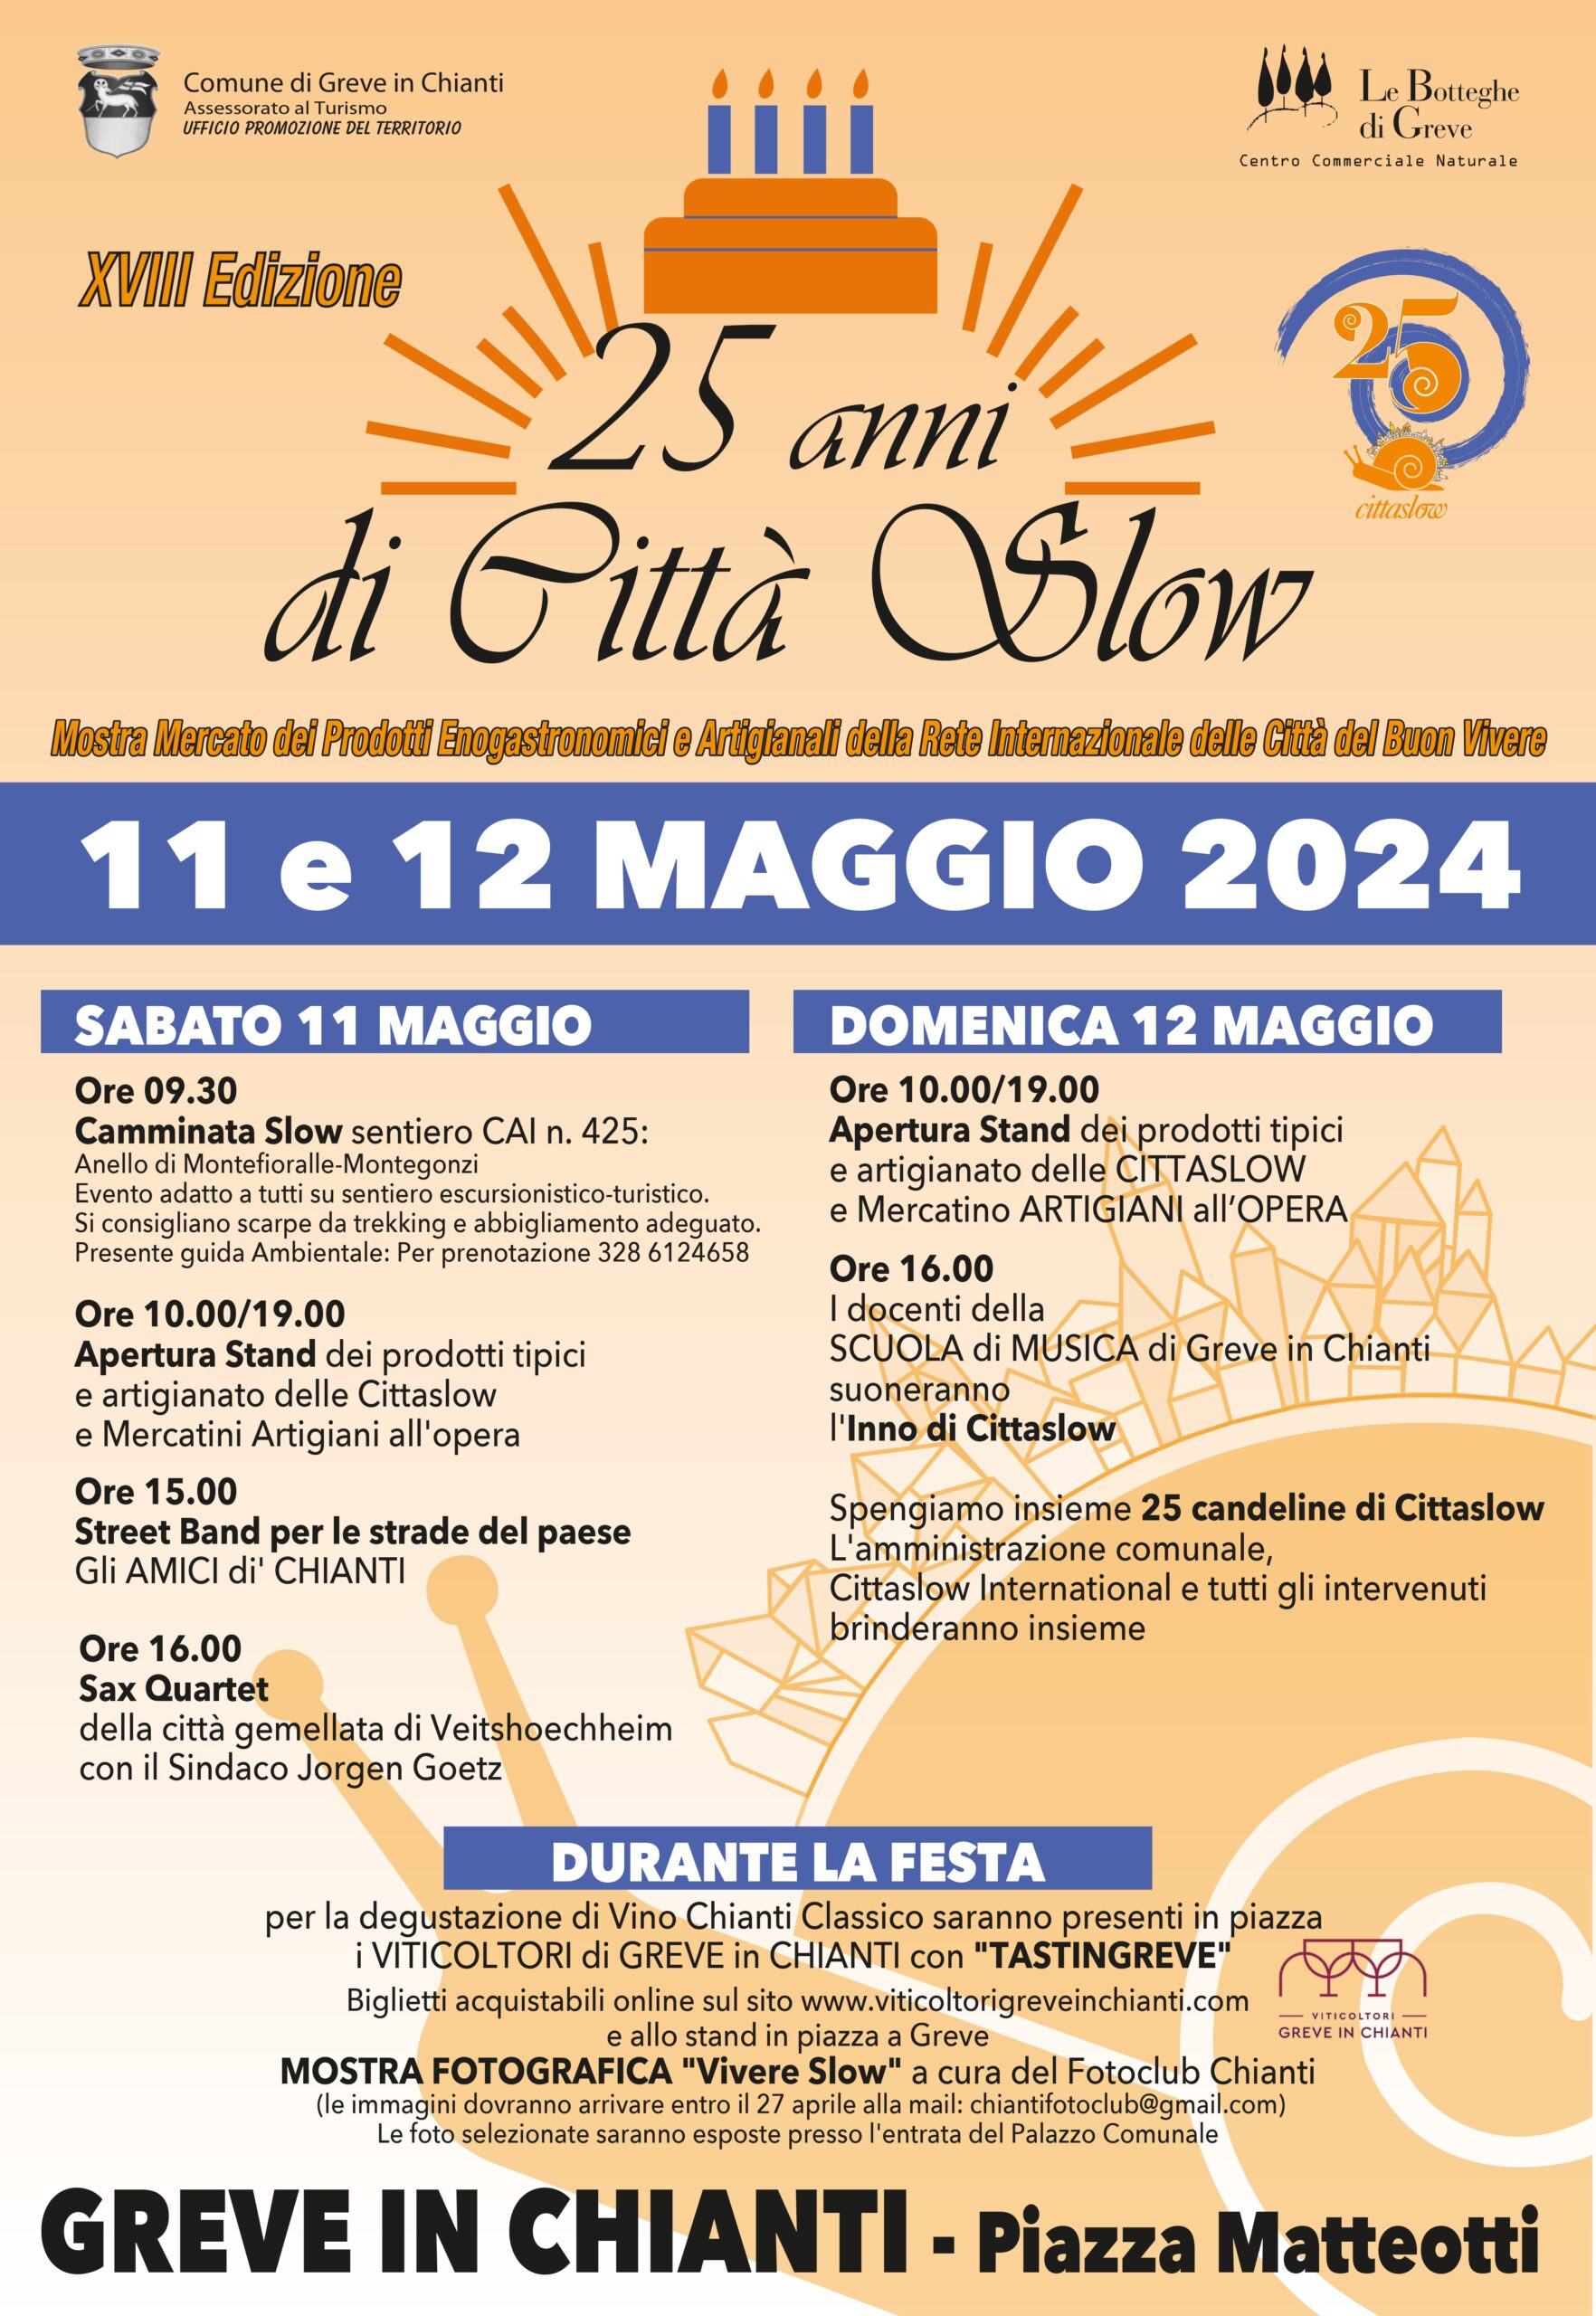 Saturday 11th and Sunday 12th May: 25 years of Slow City in Greve in Chianti